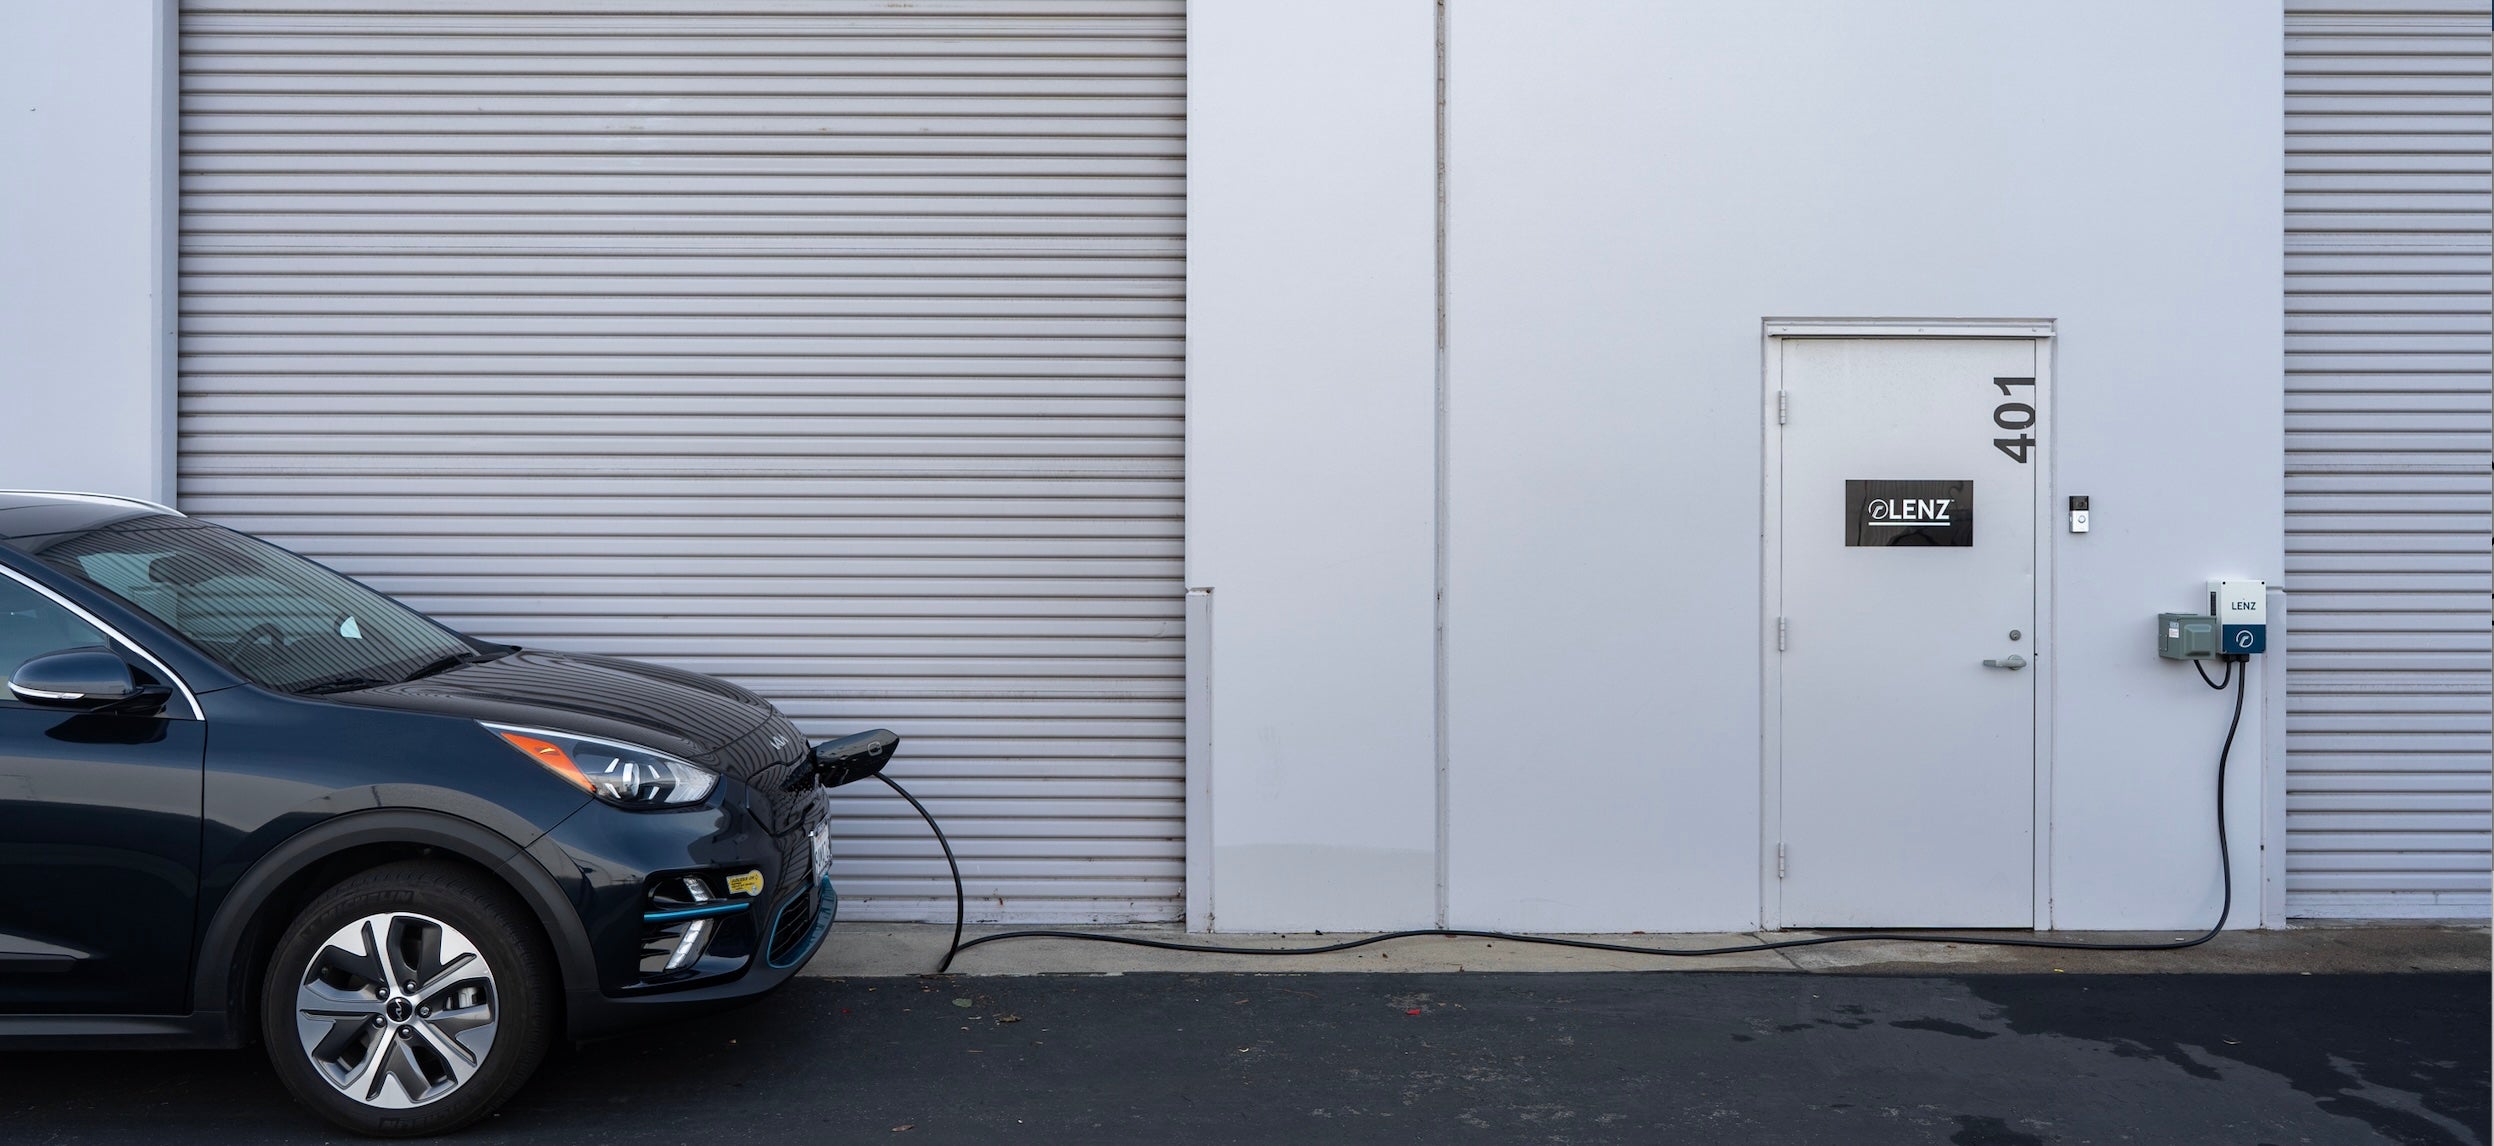 LENZ OFFICE BACKDOOR WITH EV CHARGED BY LENZ LEVEL 2 EVSE